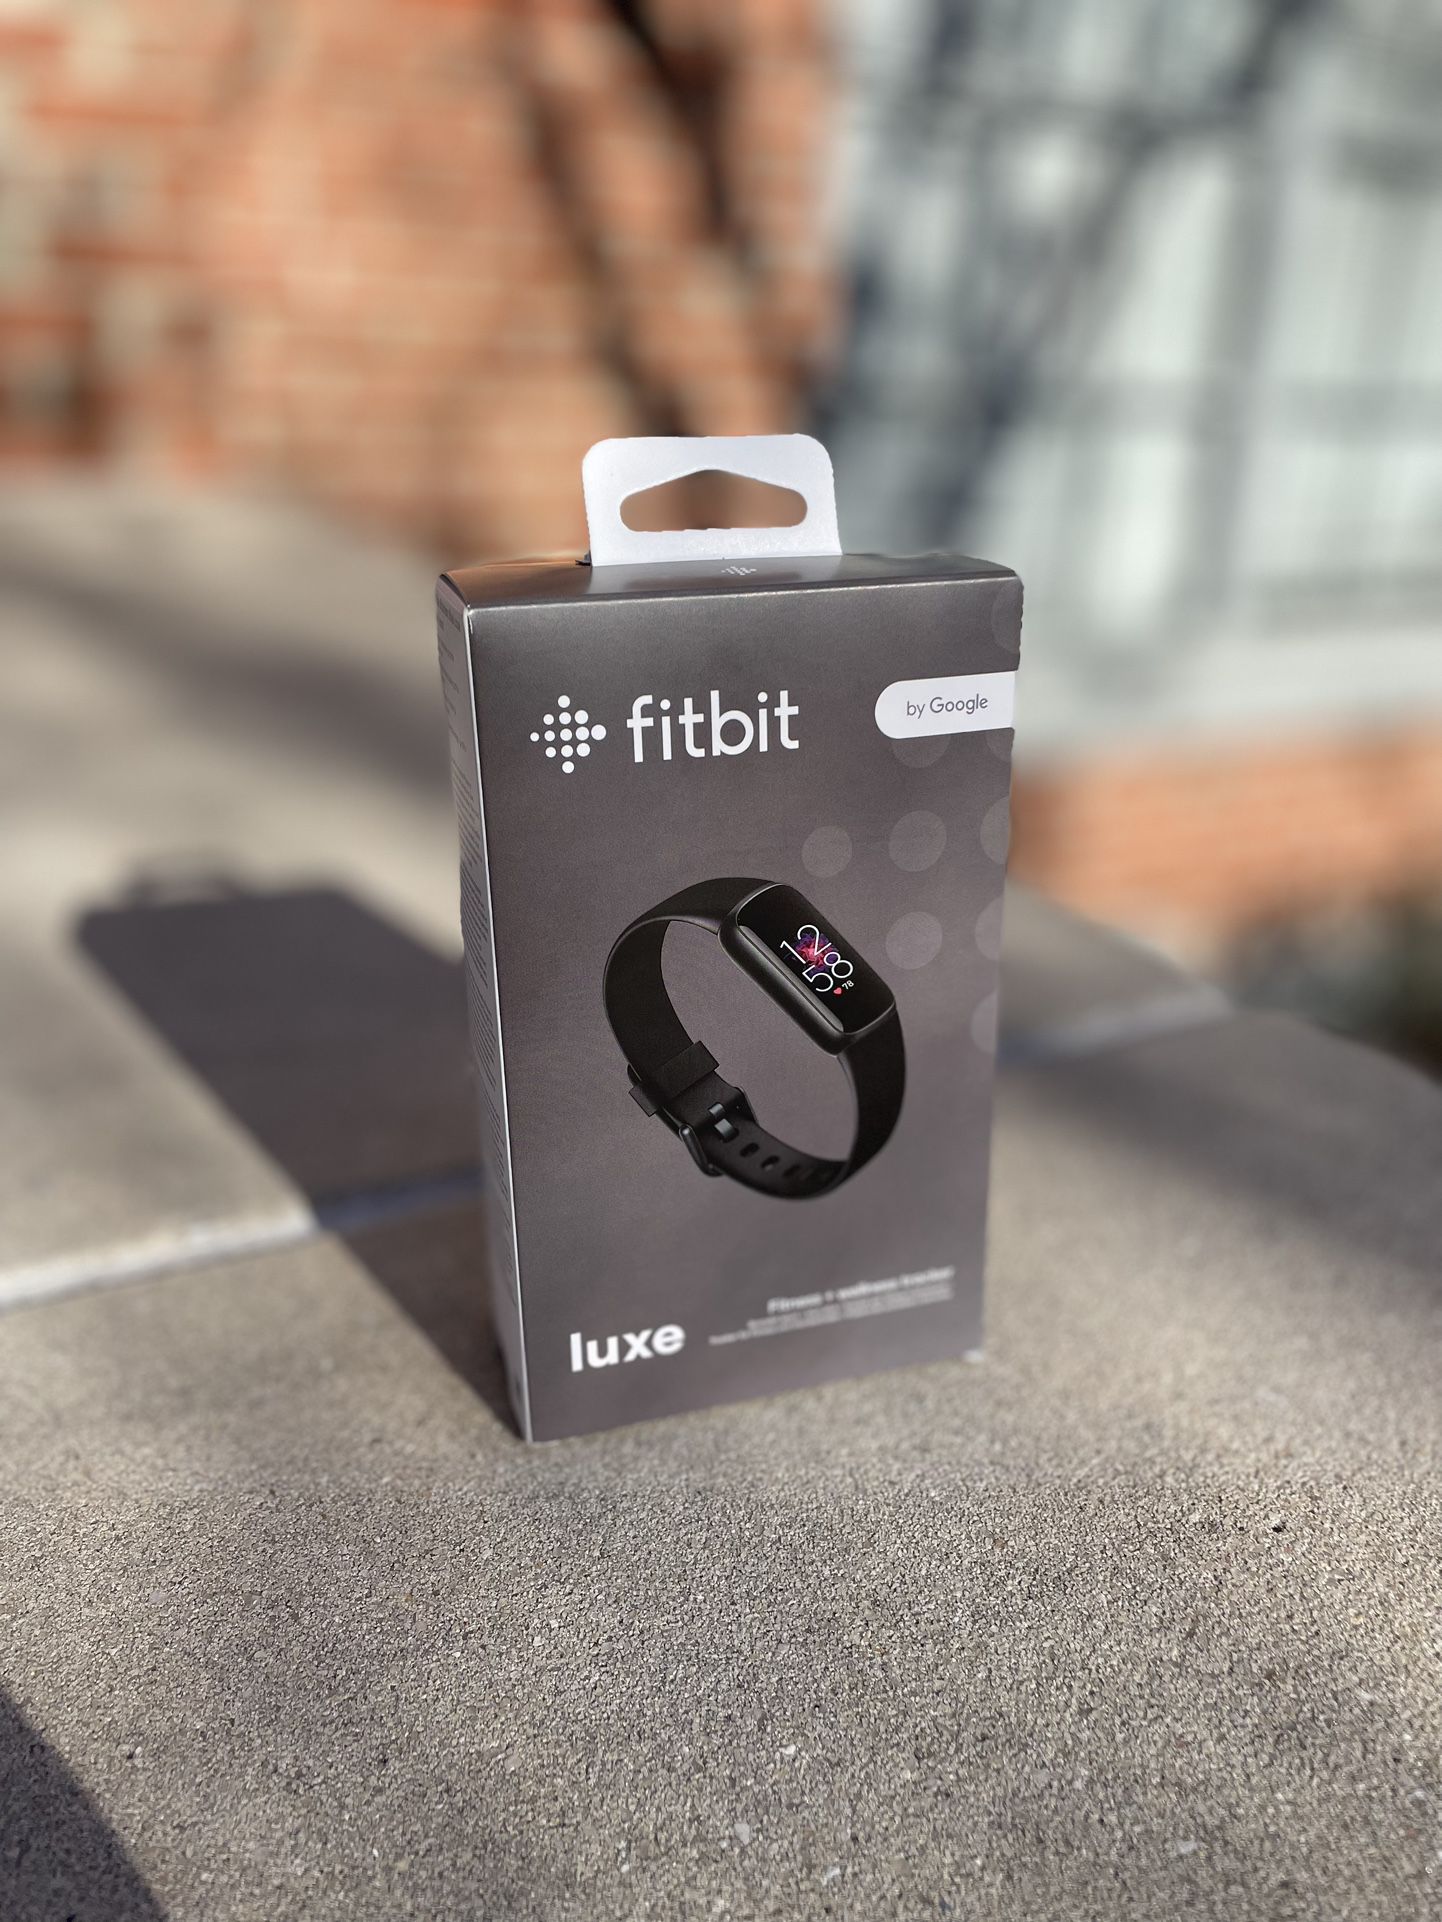 Fitbit Luxe (unopened box)